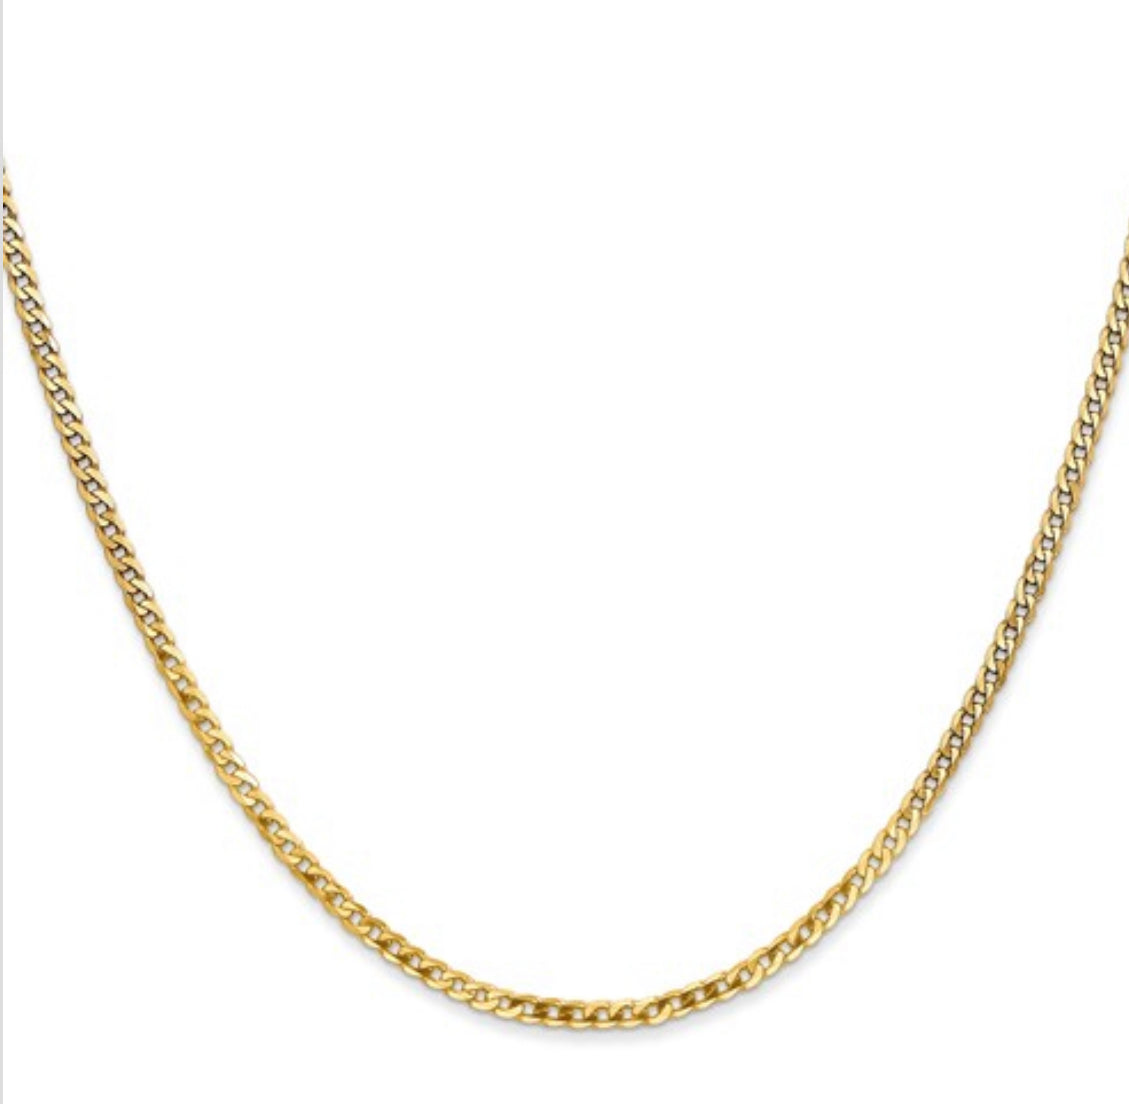 10K Yellow Gold Flat Beveled Curb Chain - 4.6mm